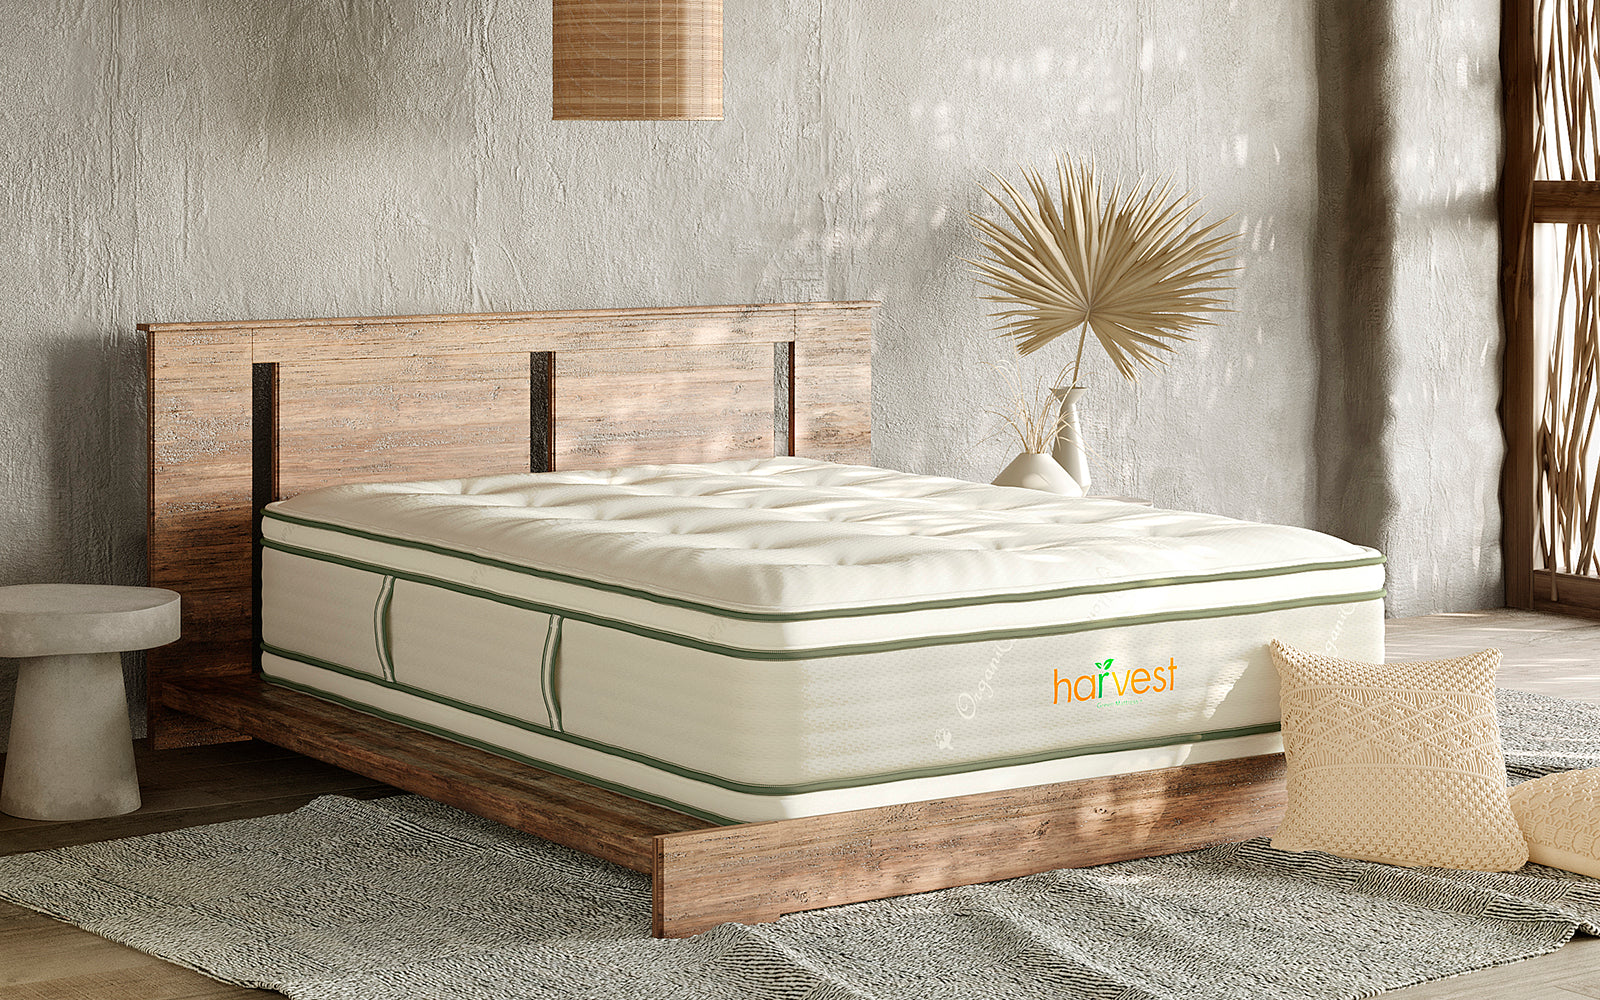 Our Harvest Green Double-Sided Pillow Top Mattress Feature Image Set in a southwestern style bedroom setting.